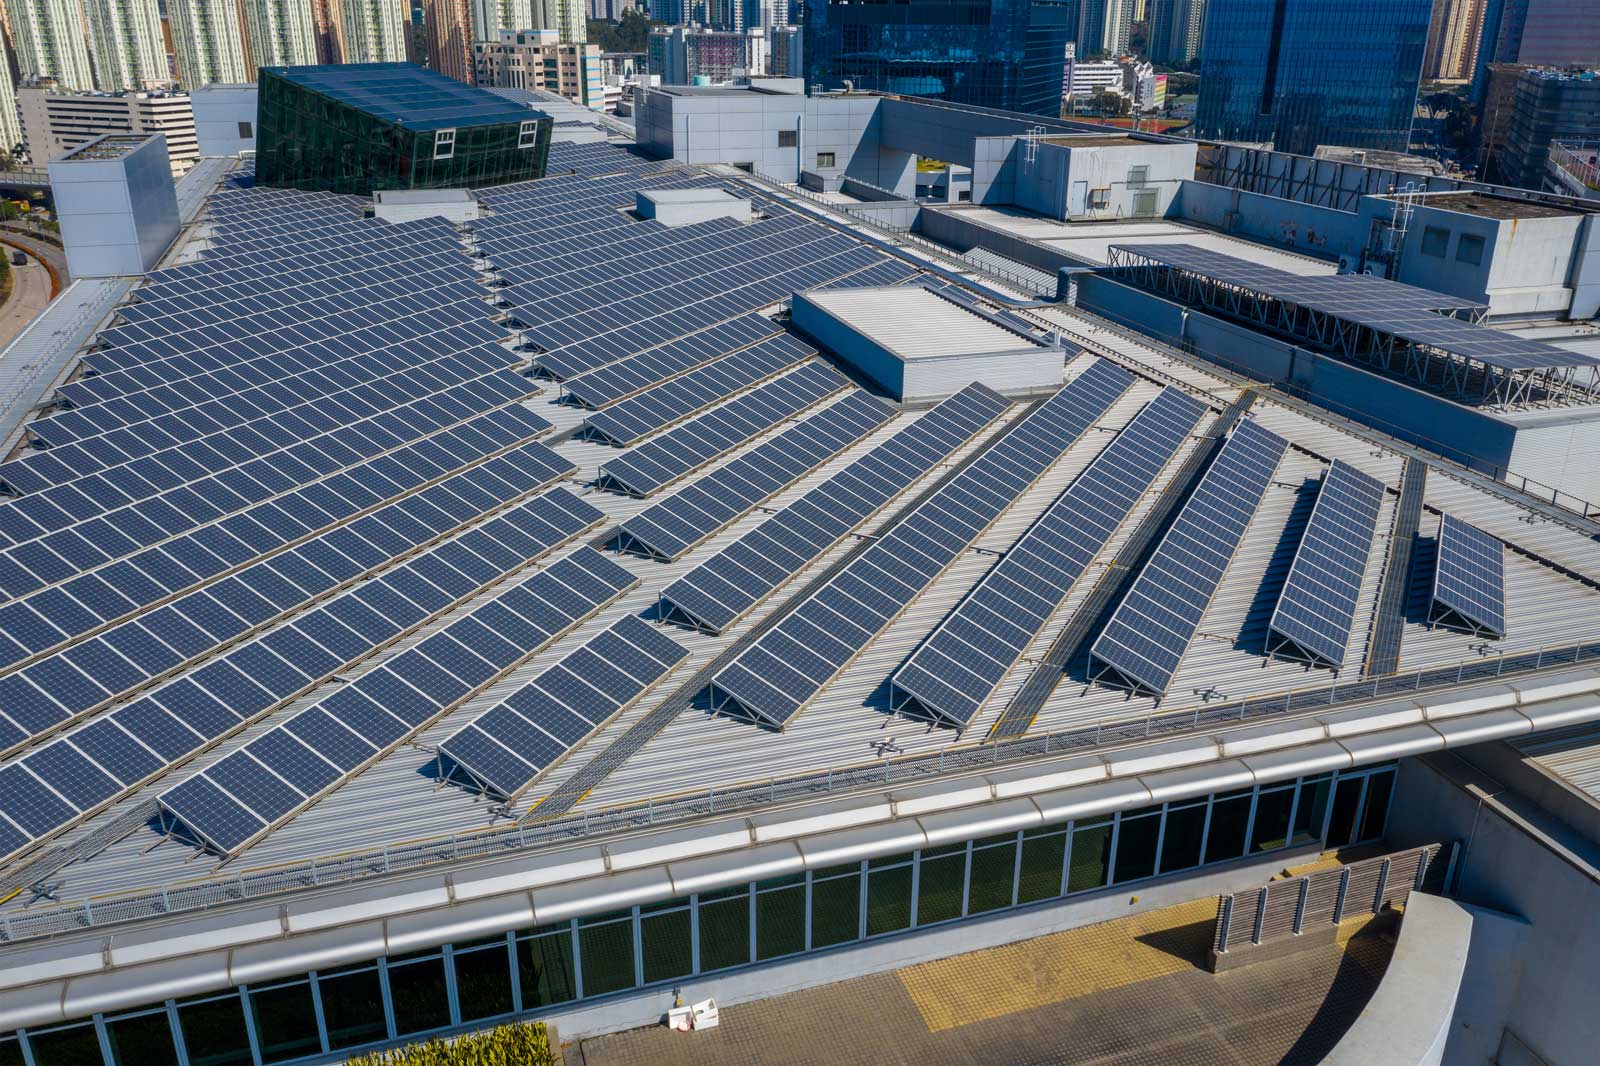 Solar panels on top of a warehouse